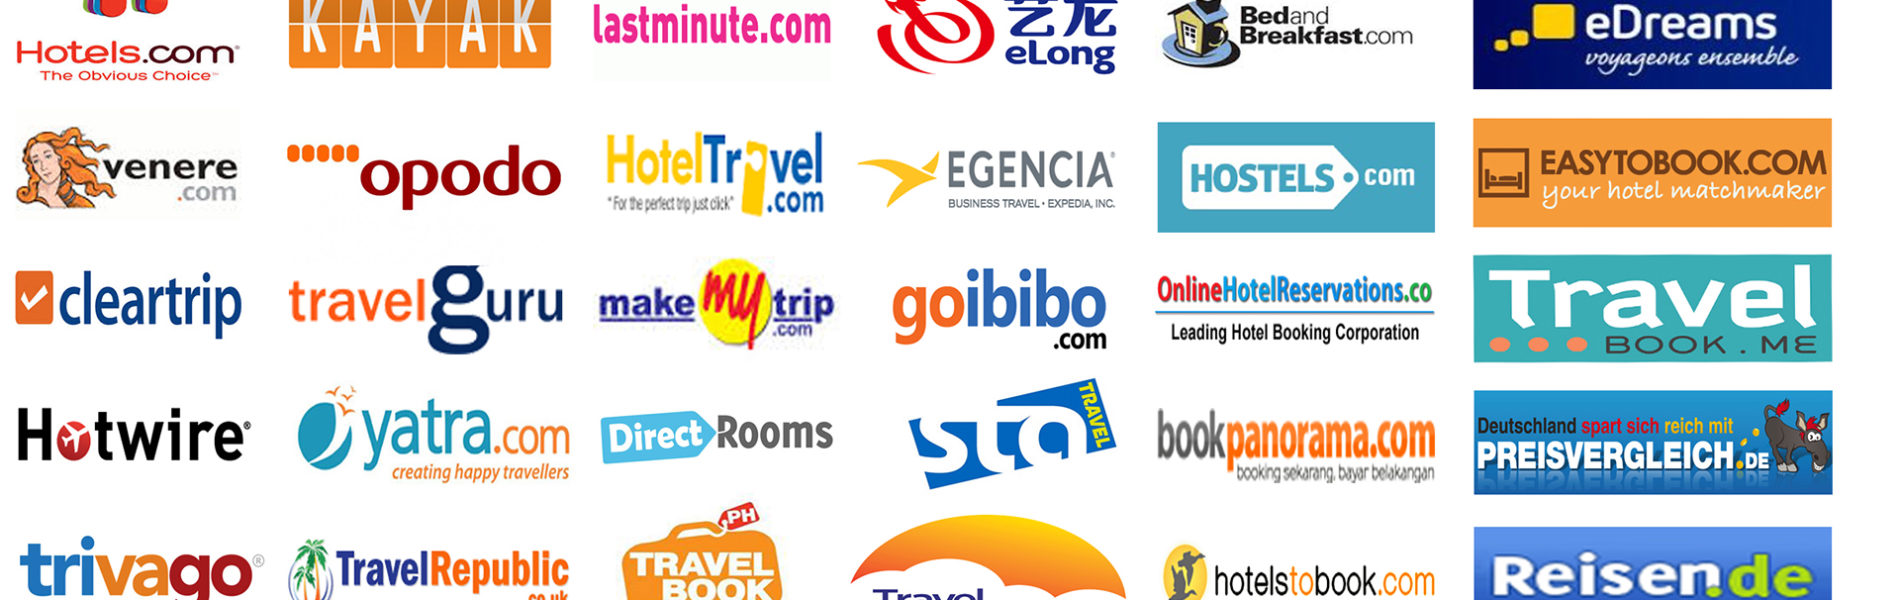 Direct hotel bookings HOW TO COMBAT OTAS? ED for hotels News